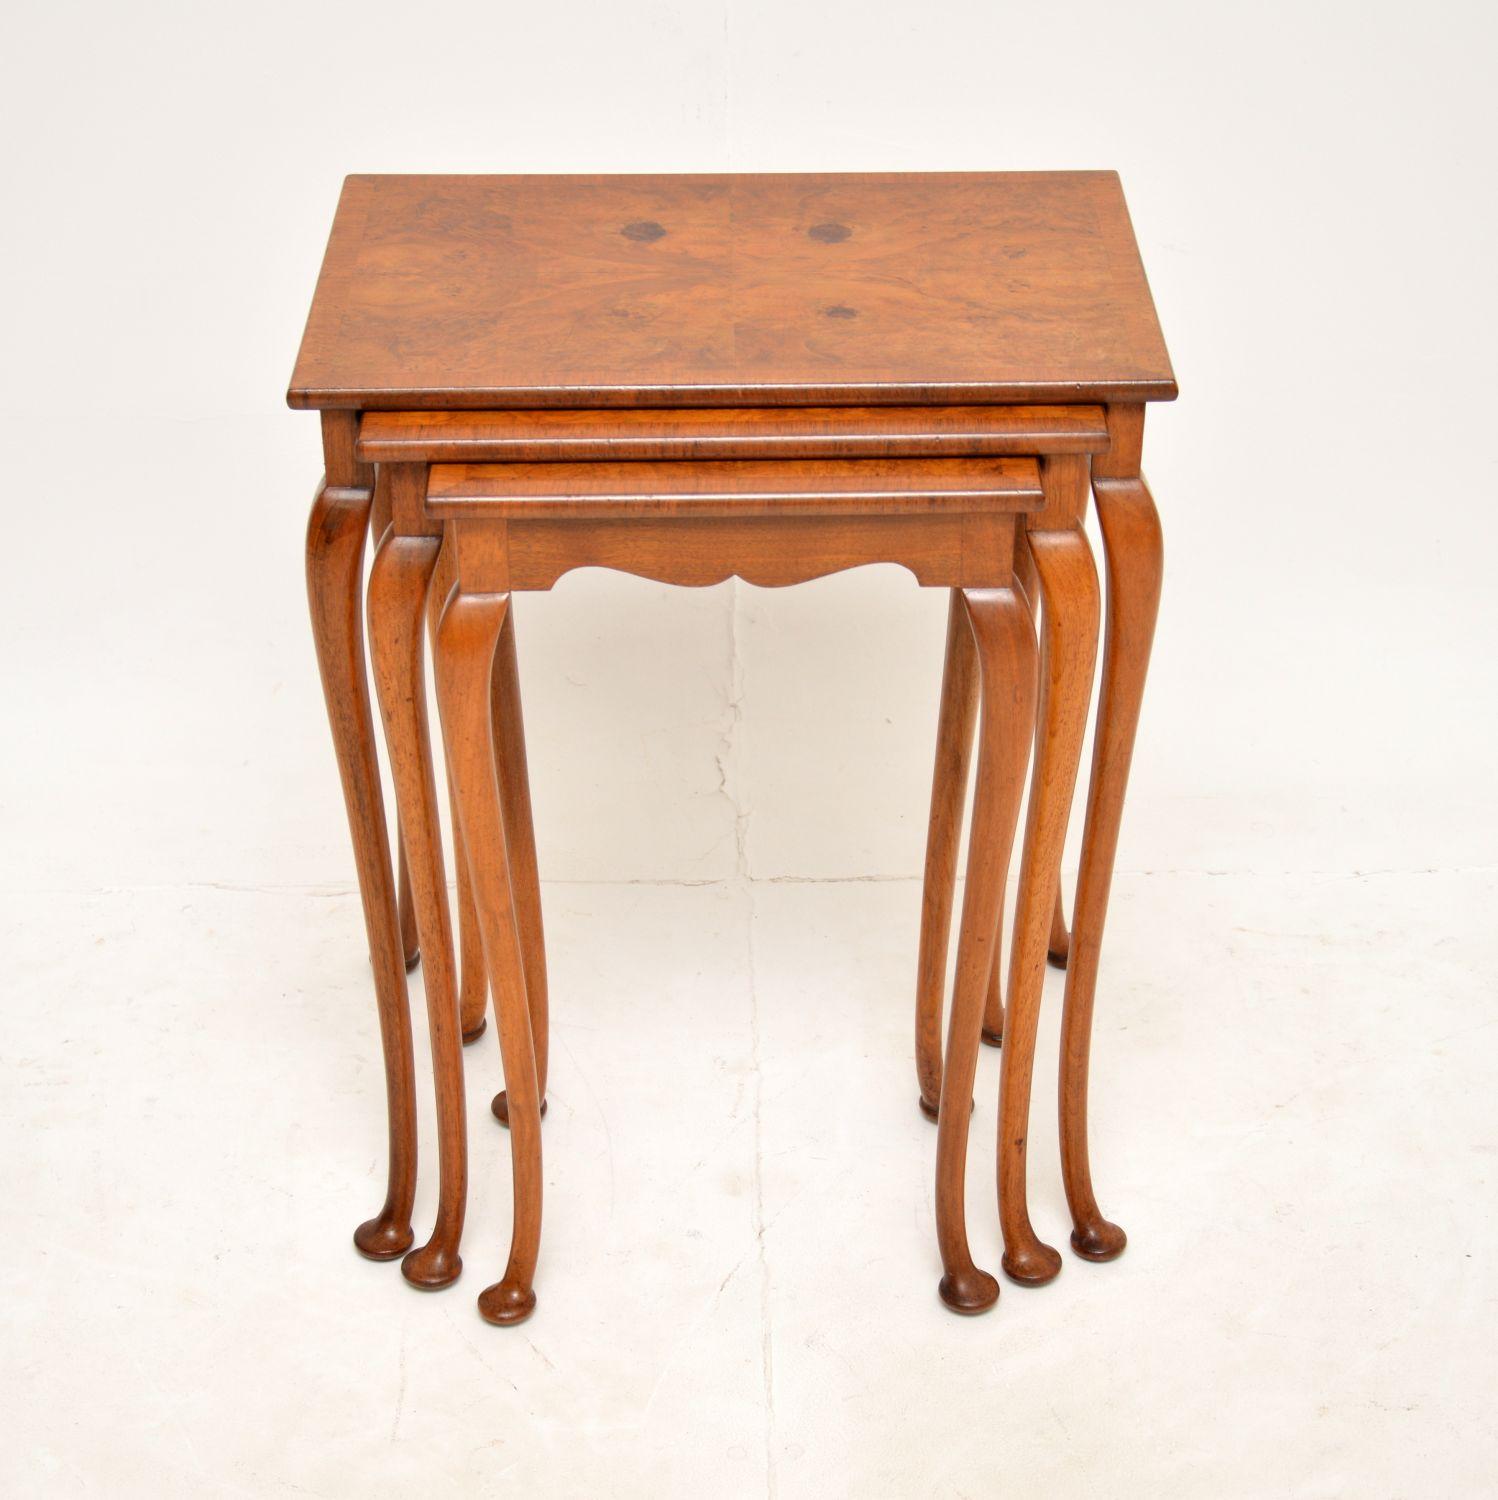 A lovely set of three antique burr walnut nesting tables. They were made in England, and date from around the 1910-1920’s period.

The quality is fantastic, they have an elegant yet sturdy design. The frames are solid walnut, the tops are figured